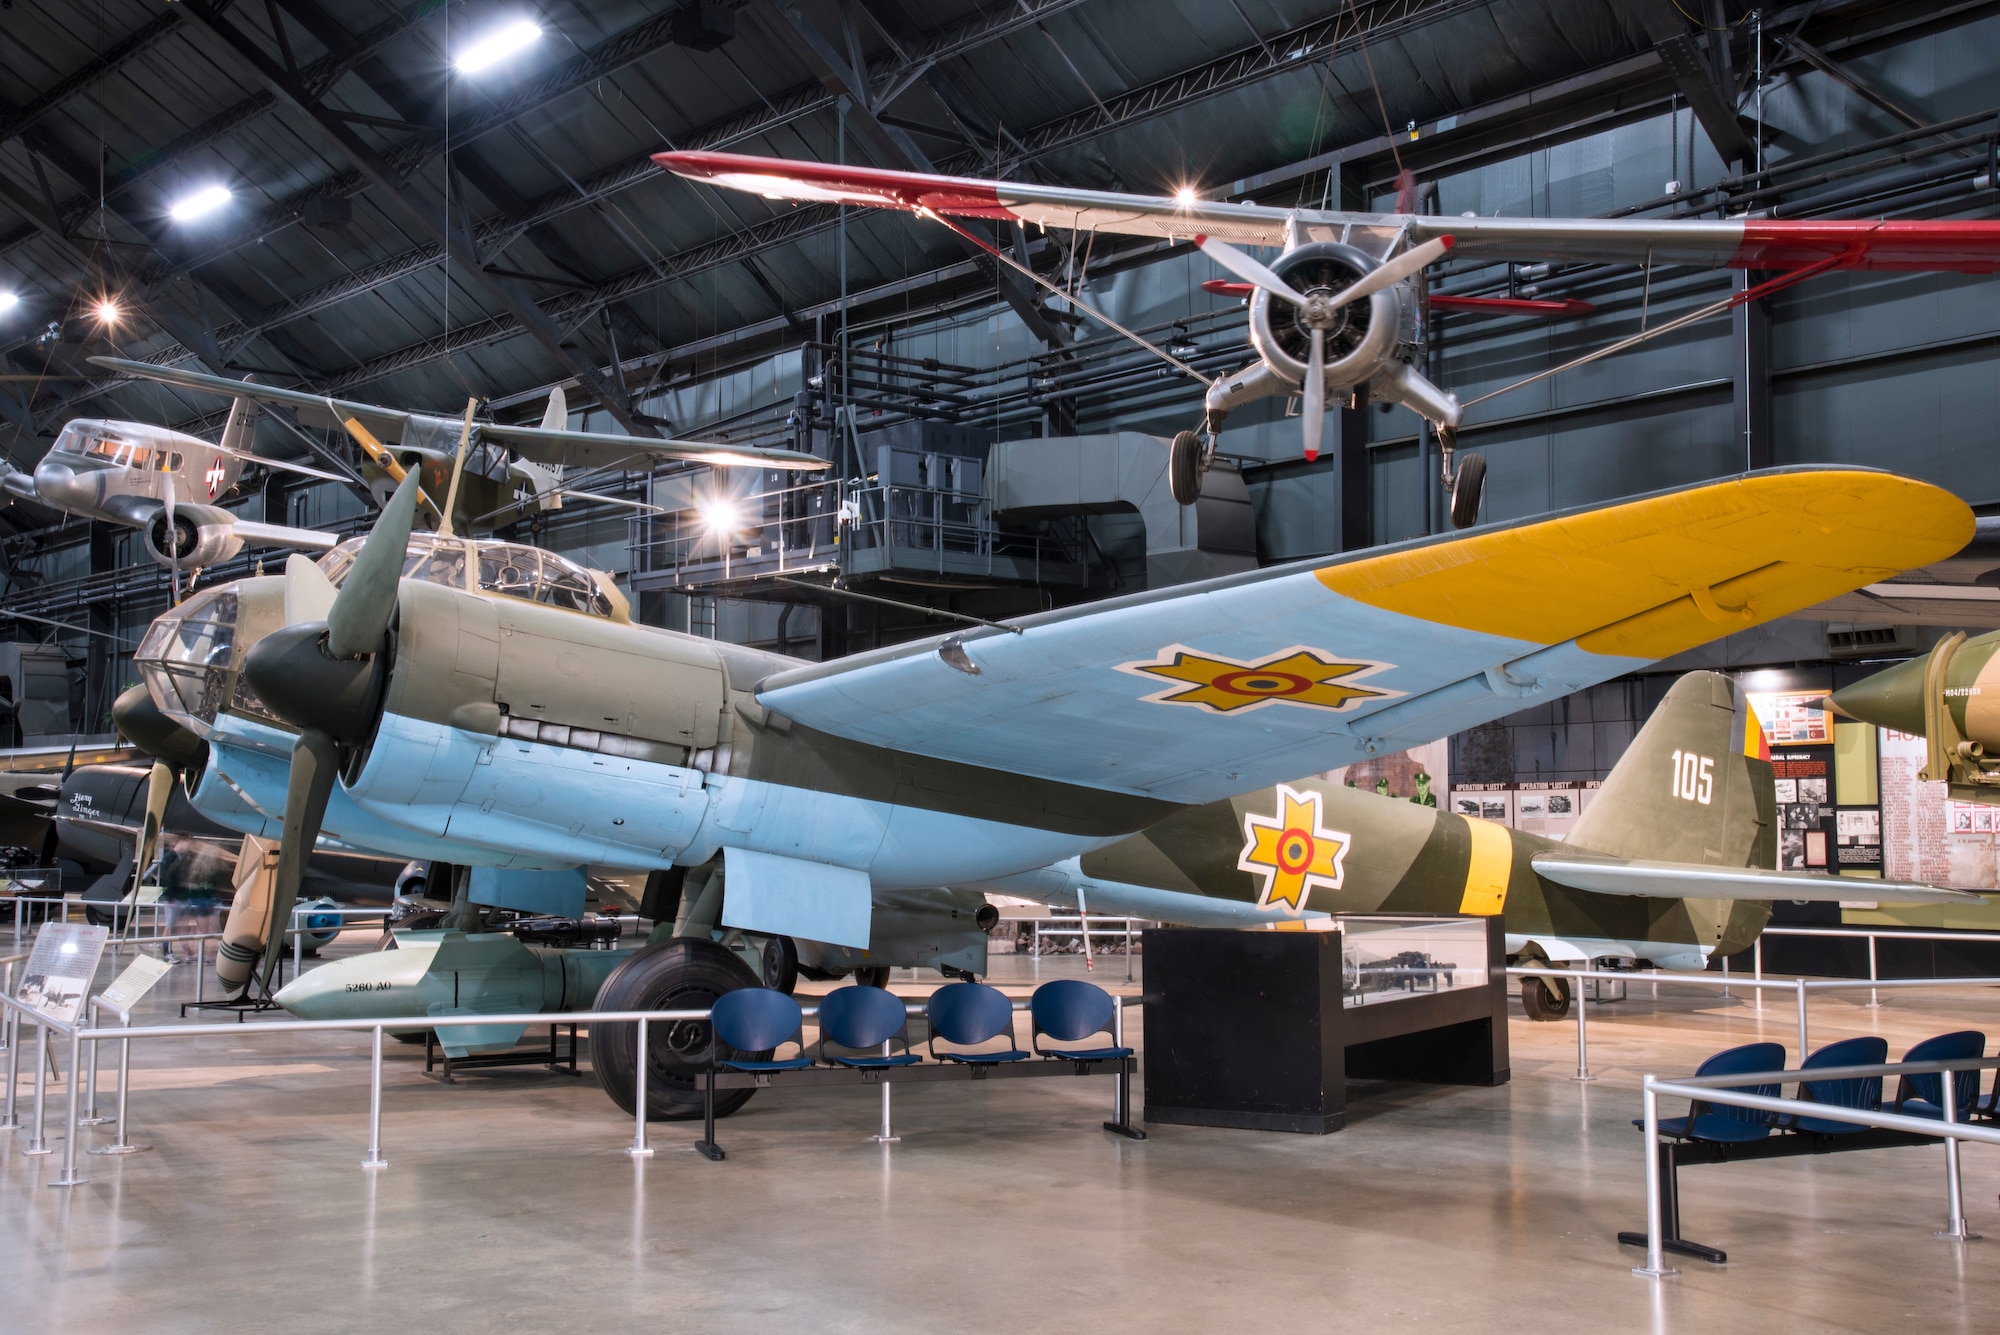 DAYTON, Ohio -- The Junkers Ju 88D-1/Trop on display in the  World War II Gallery at the National Museum of the United States Air Force. (U.S. Air Force photo by Ken LaRock)